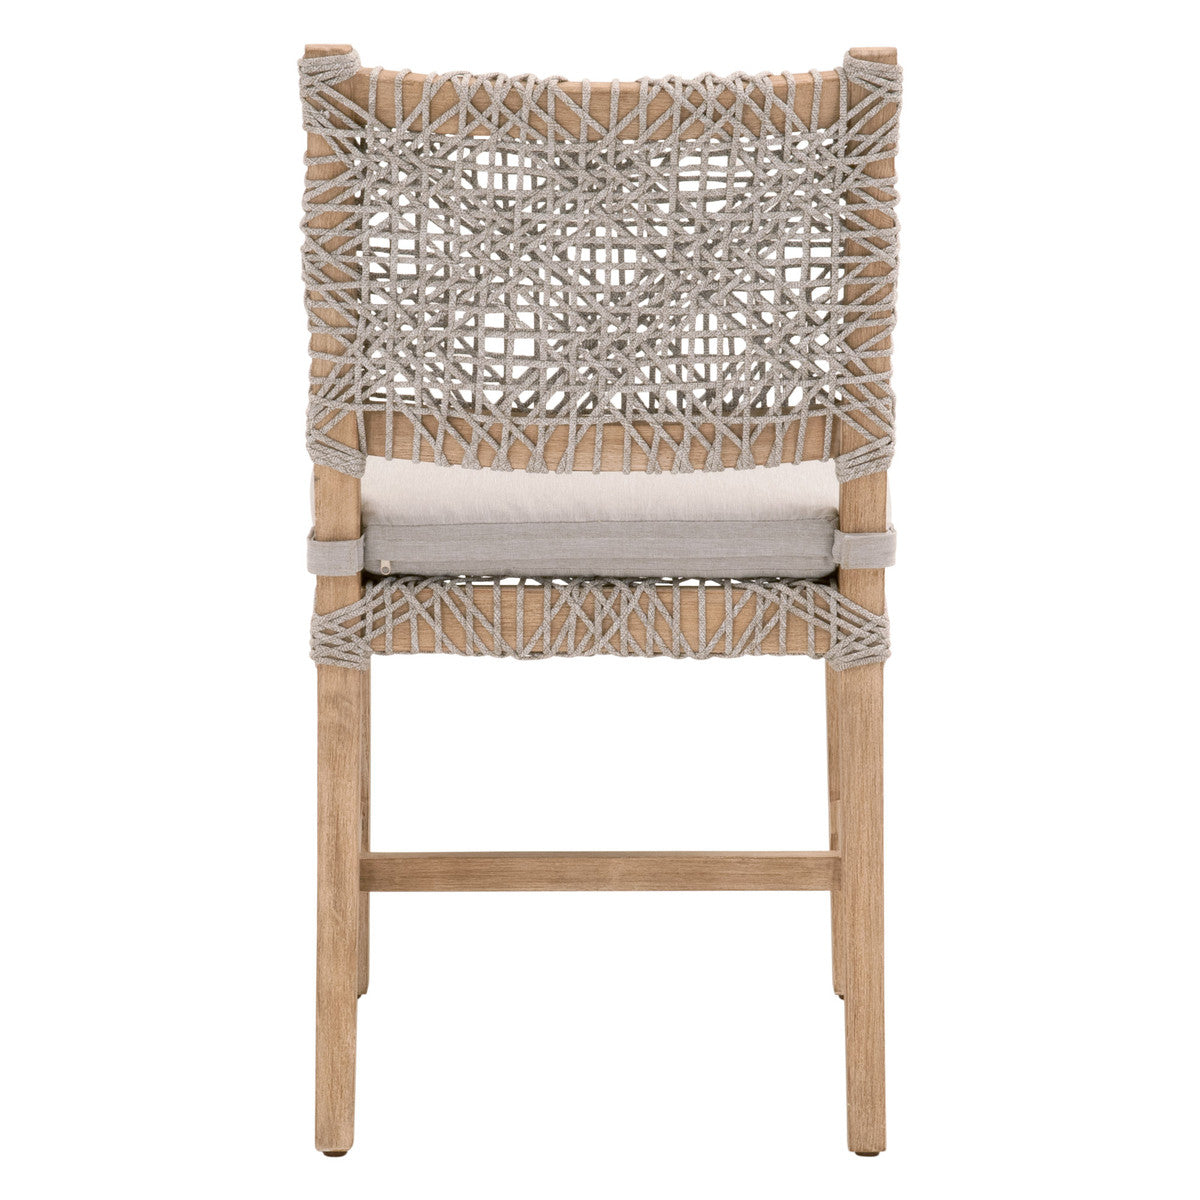 Catalina Dining Chair - Set of 2